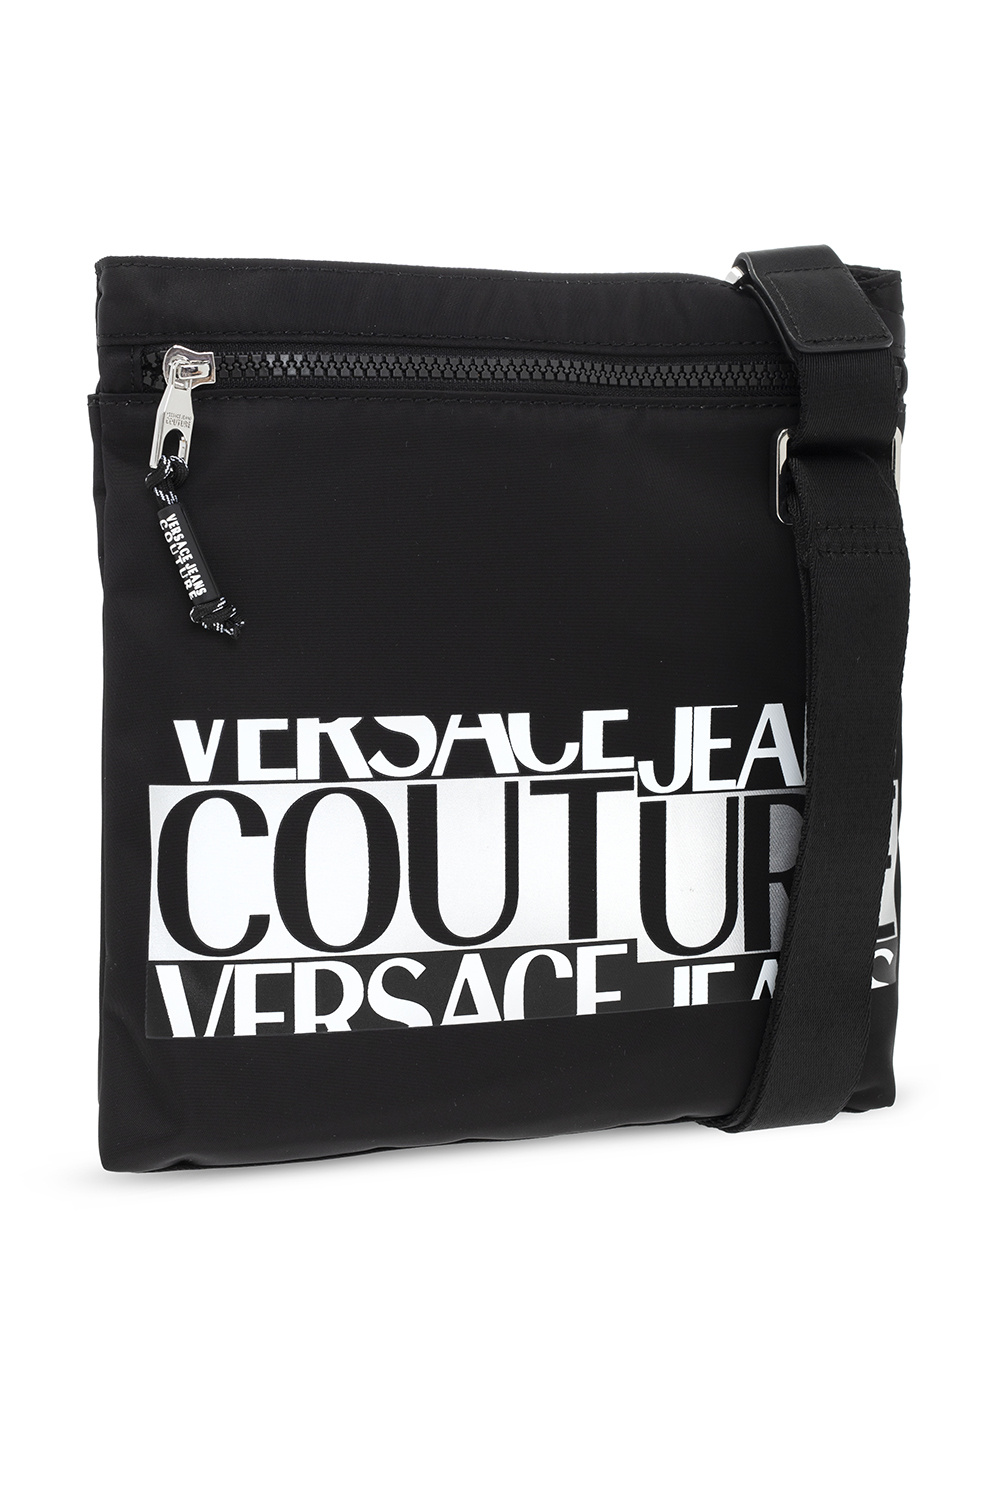 Versace Ruched jeans Couture Shoulder bag